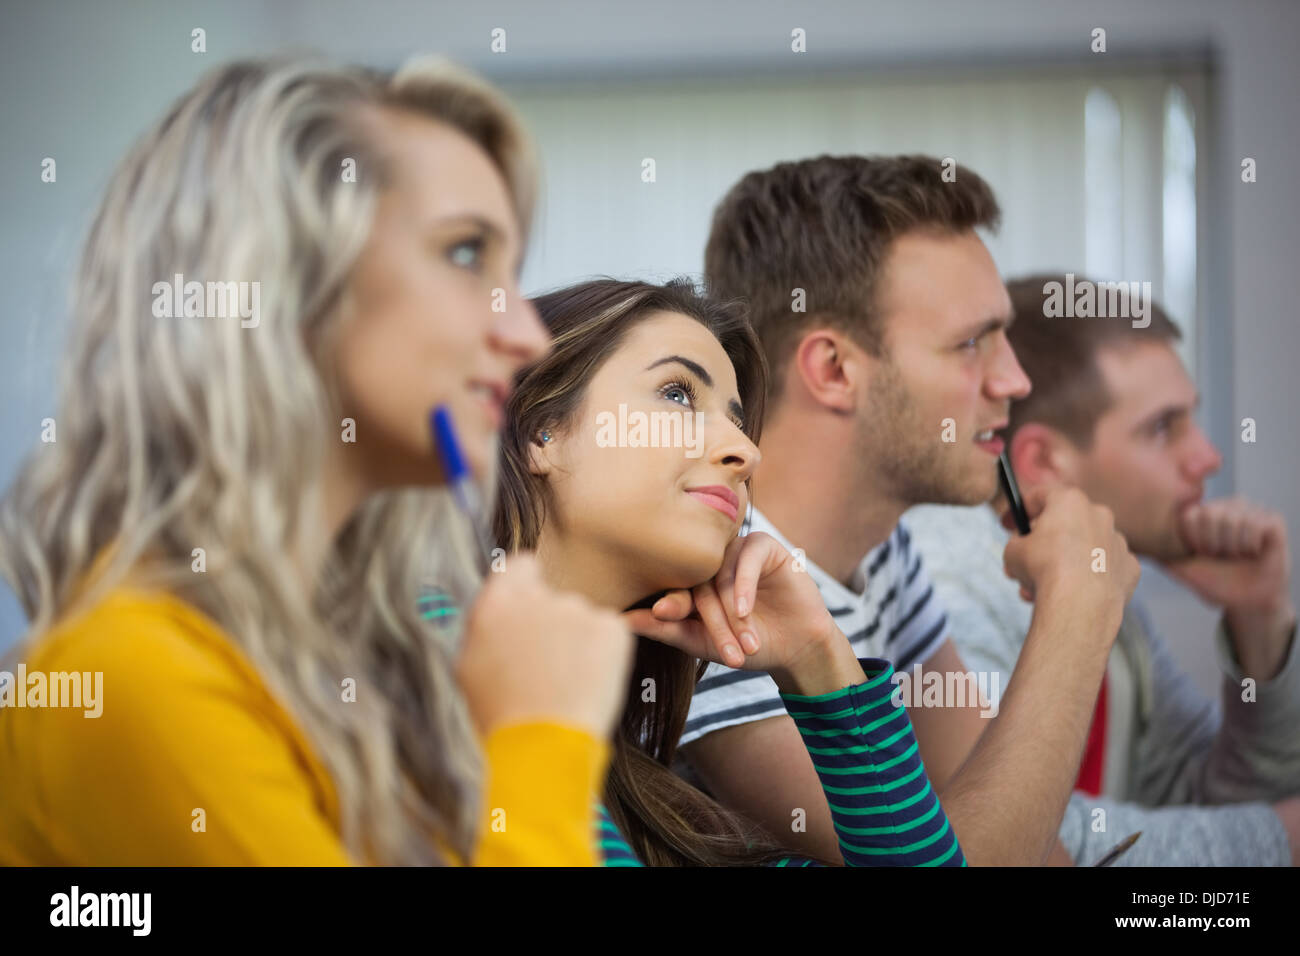 Day dreaming brunette student between classmates Stock Photo